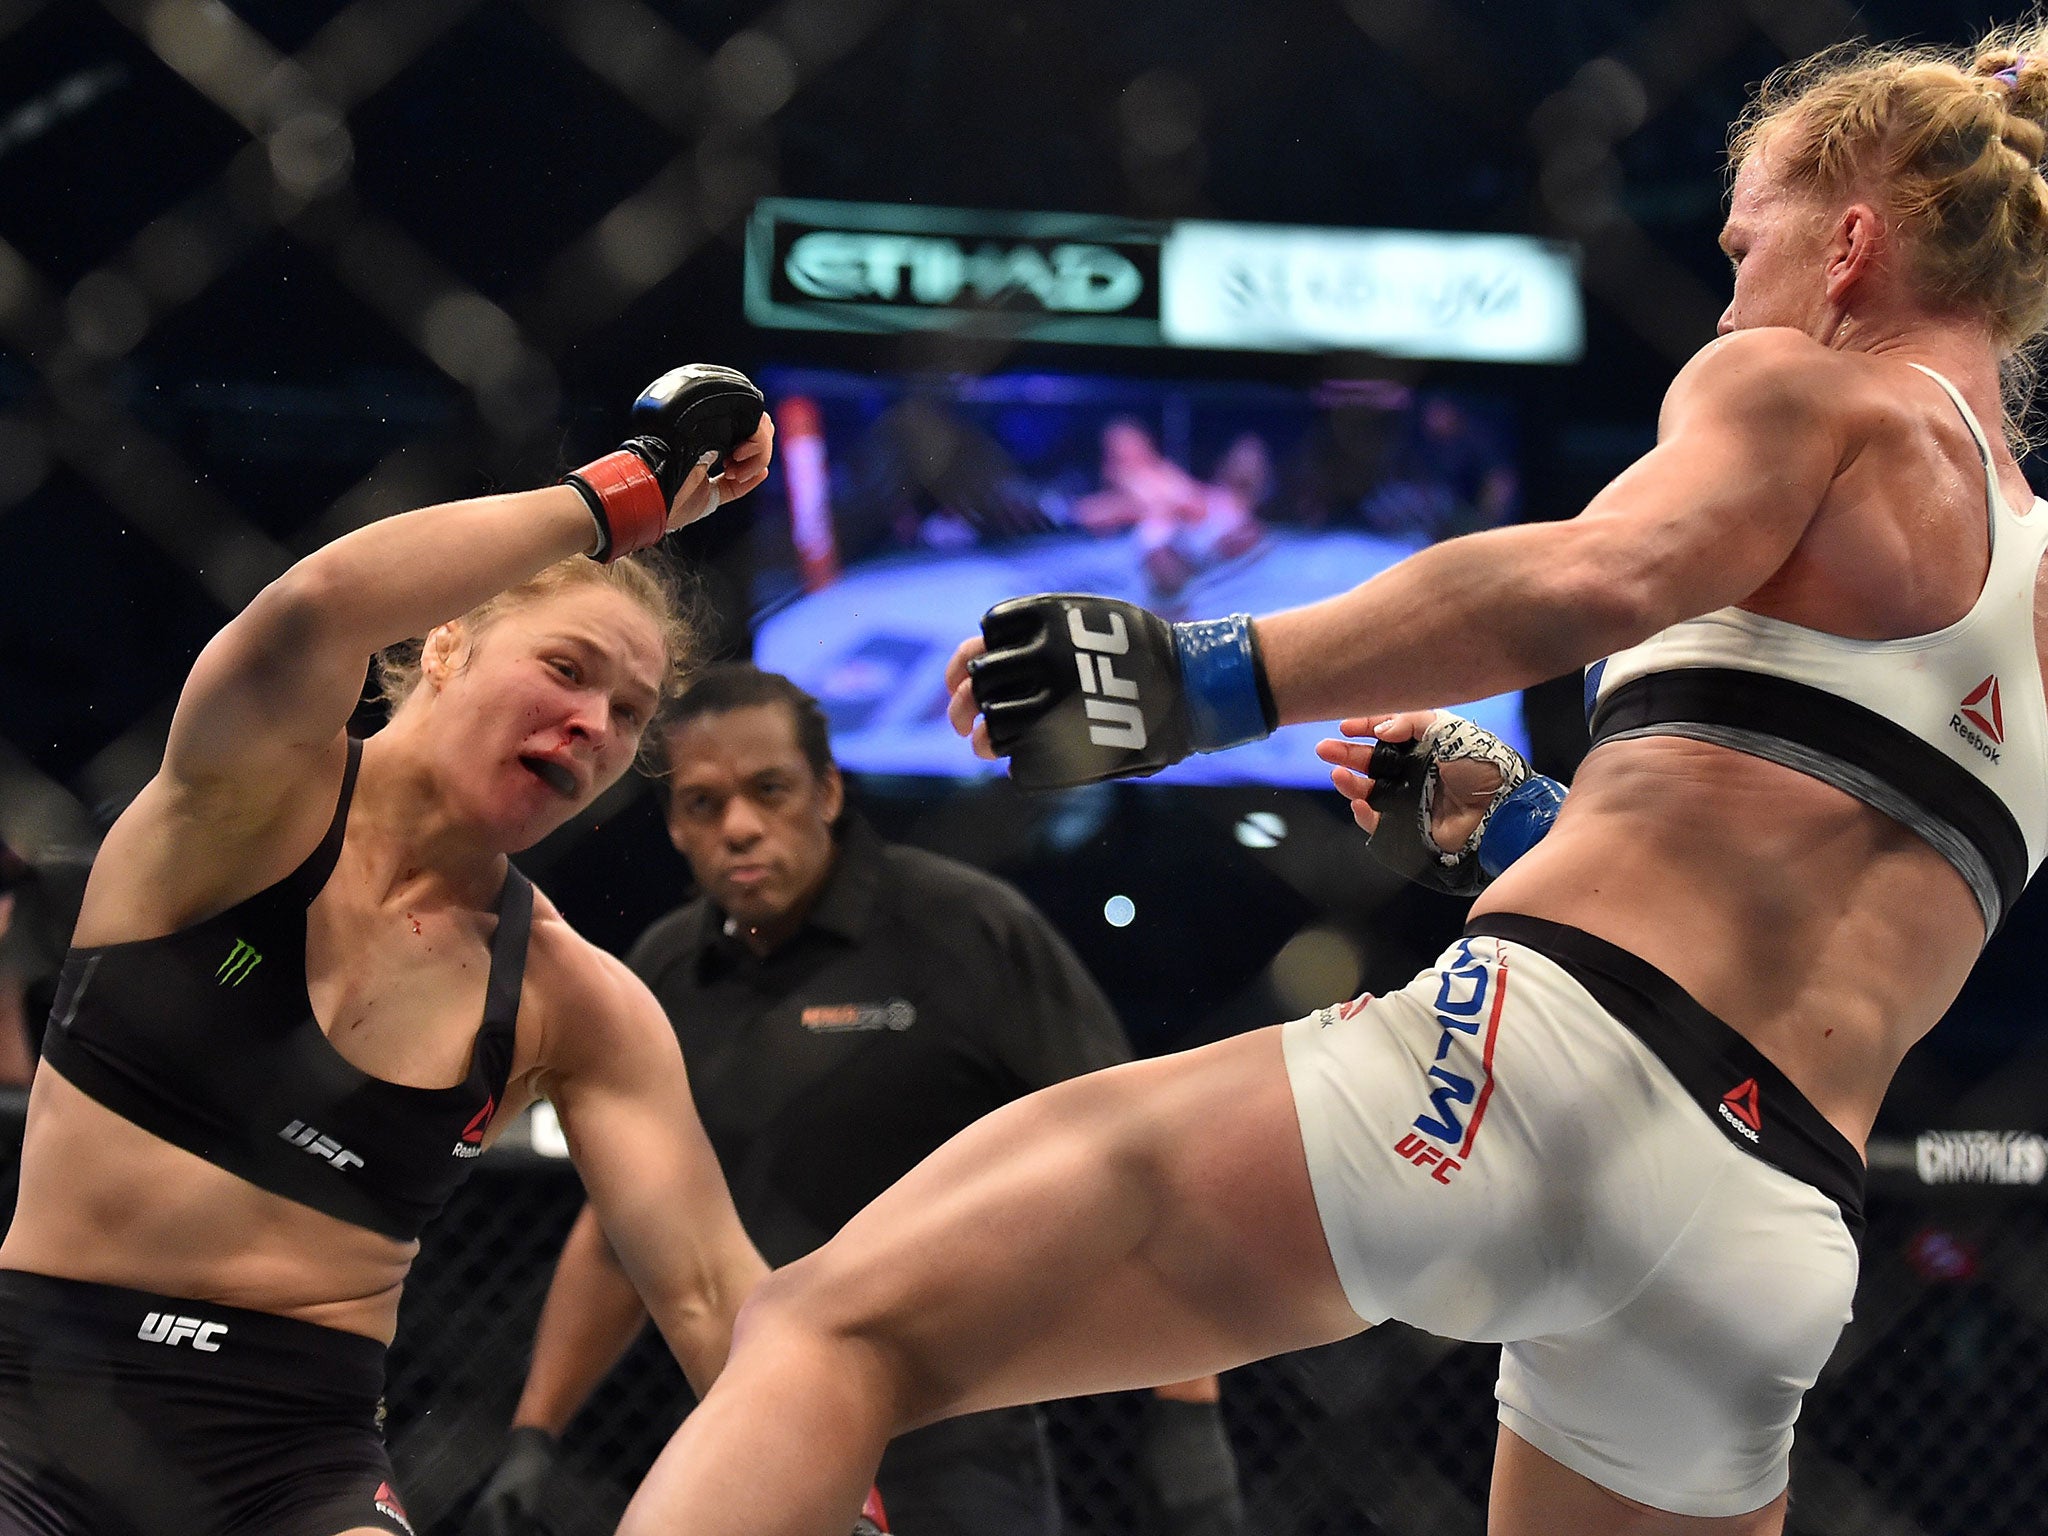 Rousey is rocked as Holm delivers a knockout kick to win the UFC bantamweight title